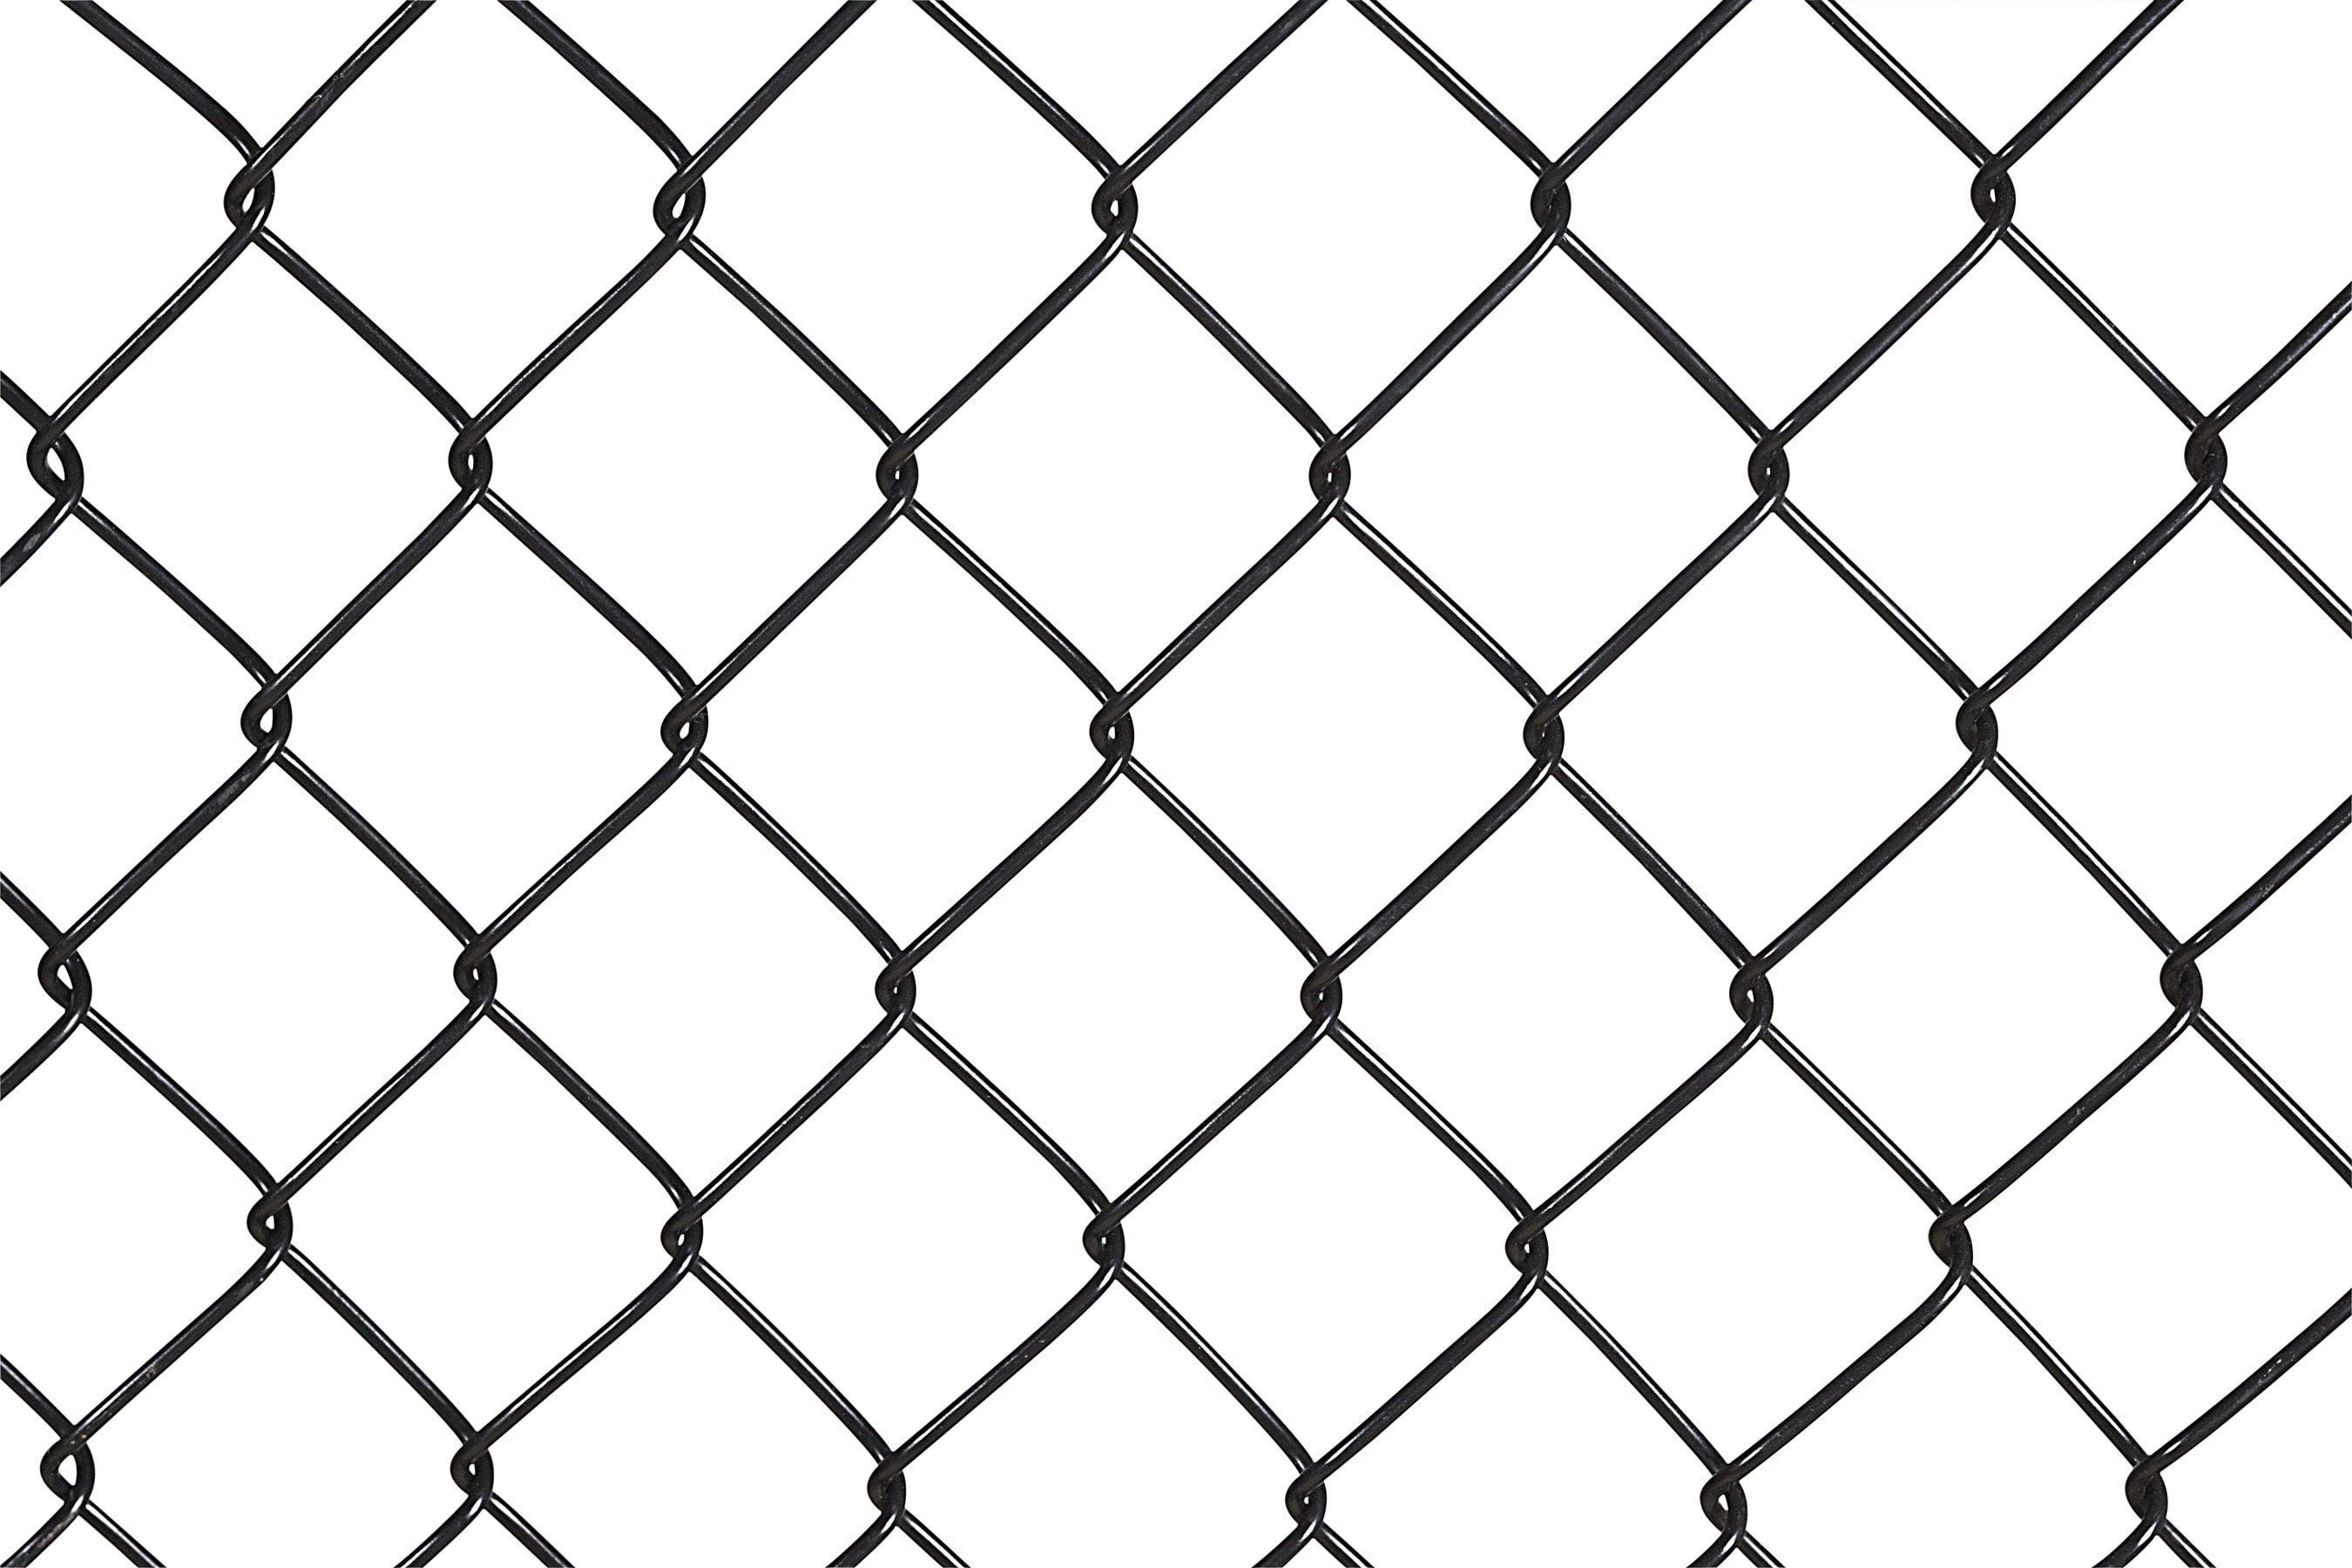 4-ft H x 50-ft W 9-Gauge Vinyl Coated Steel Chain Link Fence Fabric with Mesh Size 2-in in the Chain Link Fencing department at Lowes